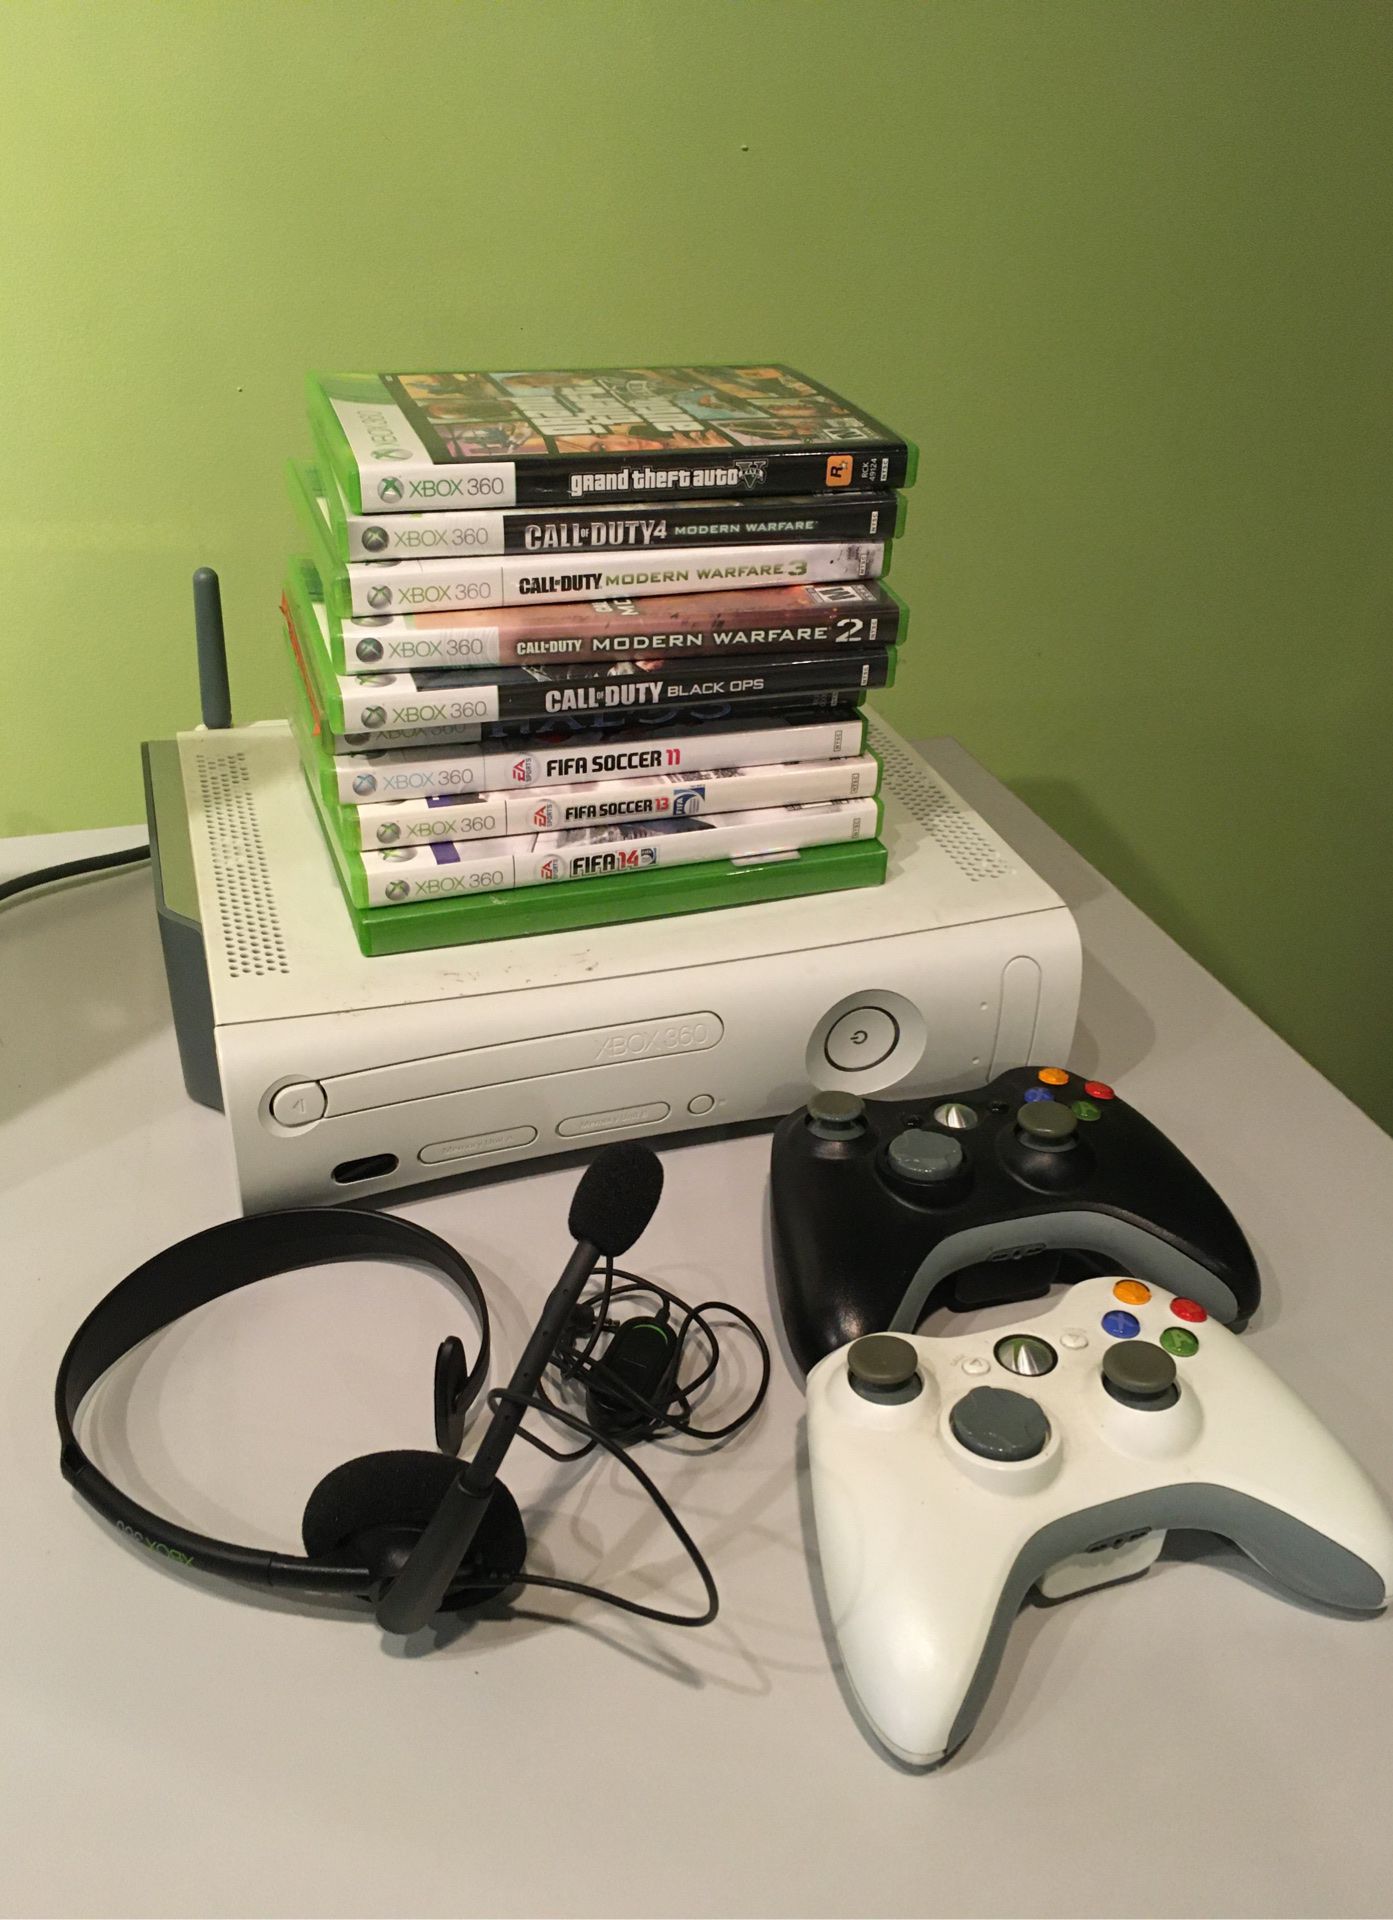 Xbox 360 with 9 games